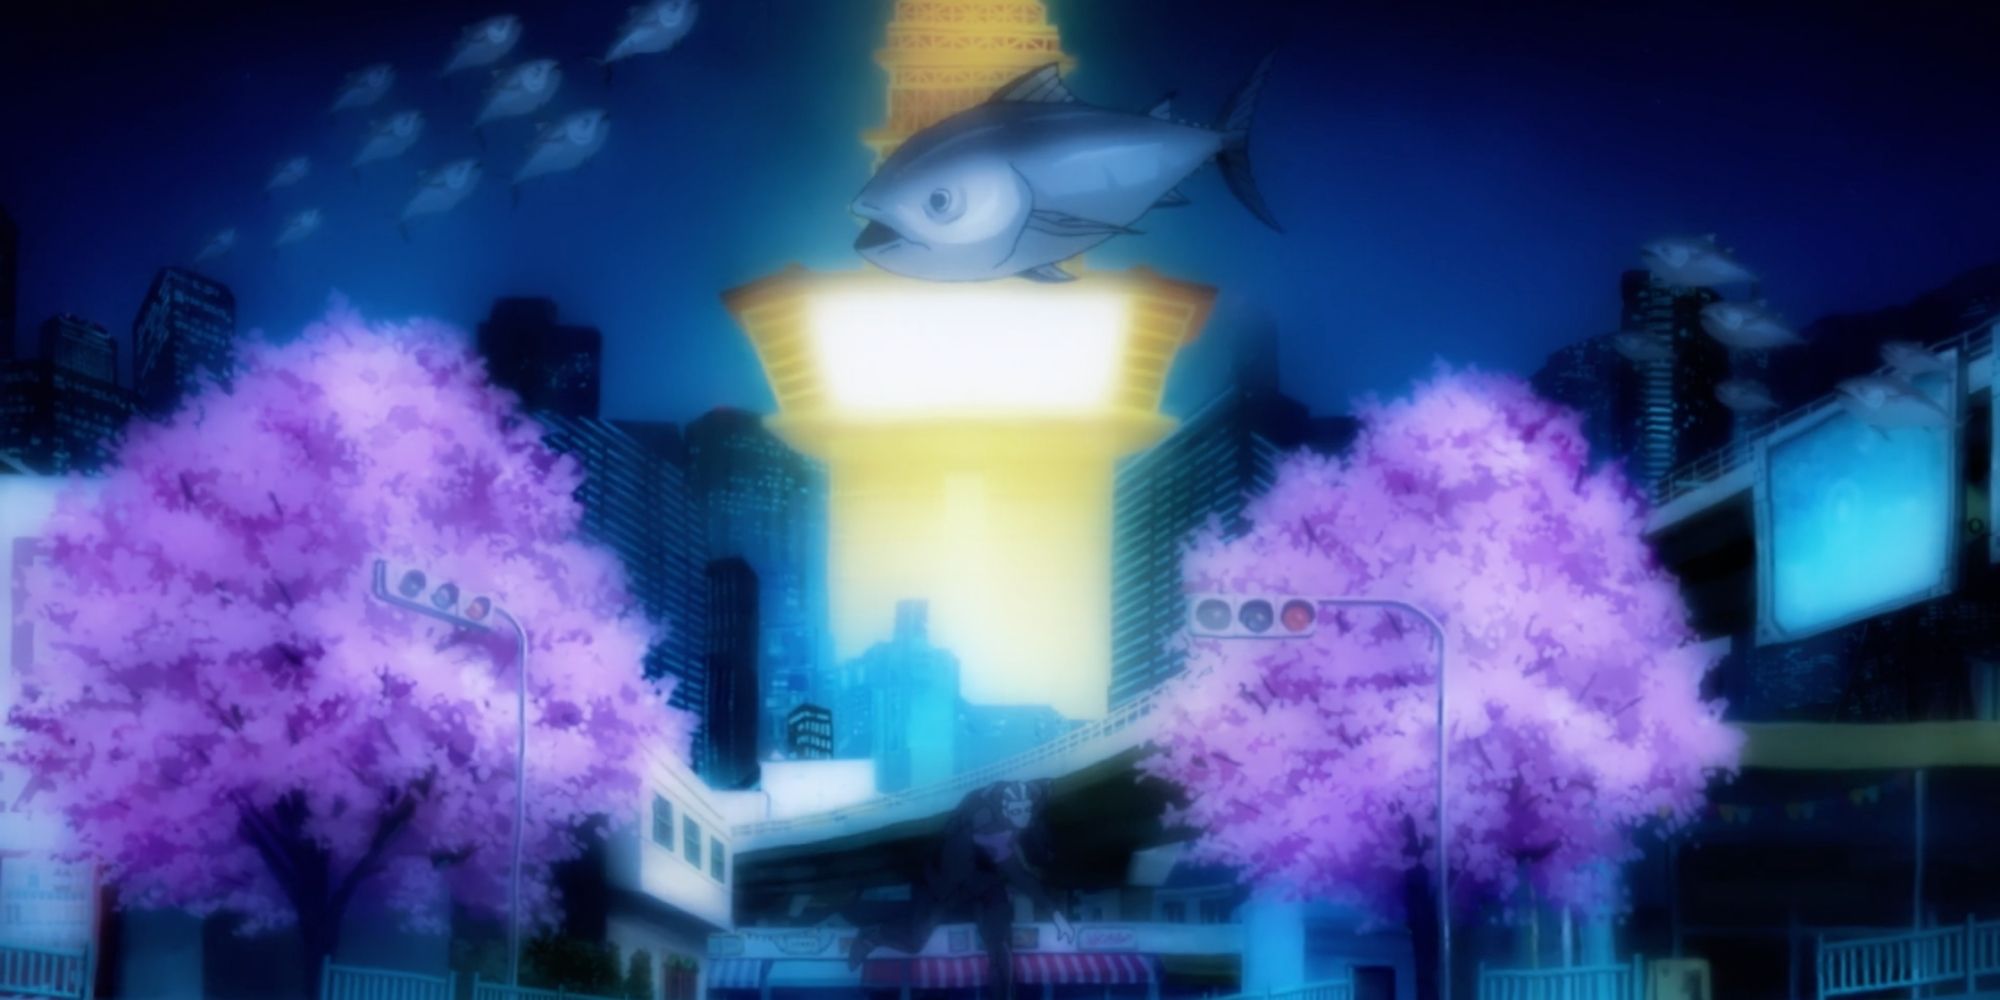 Neo Tokyo submerged in water with fish and the radio tower in the background.